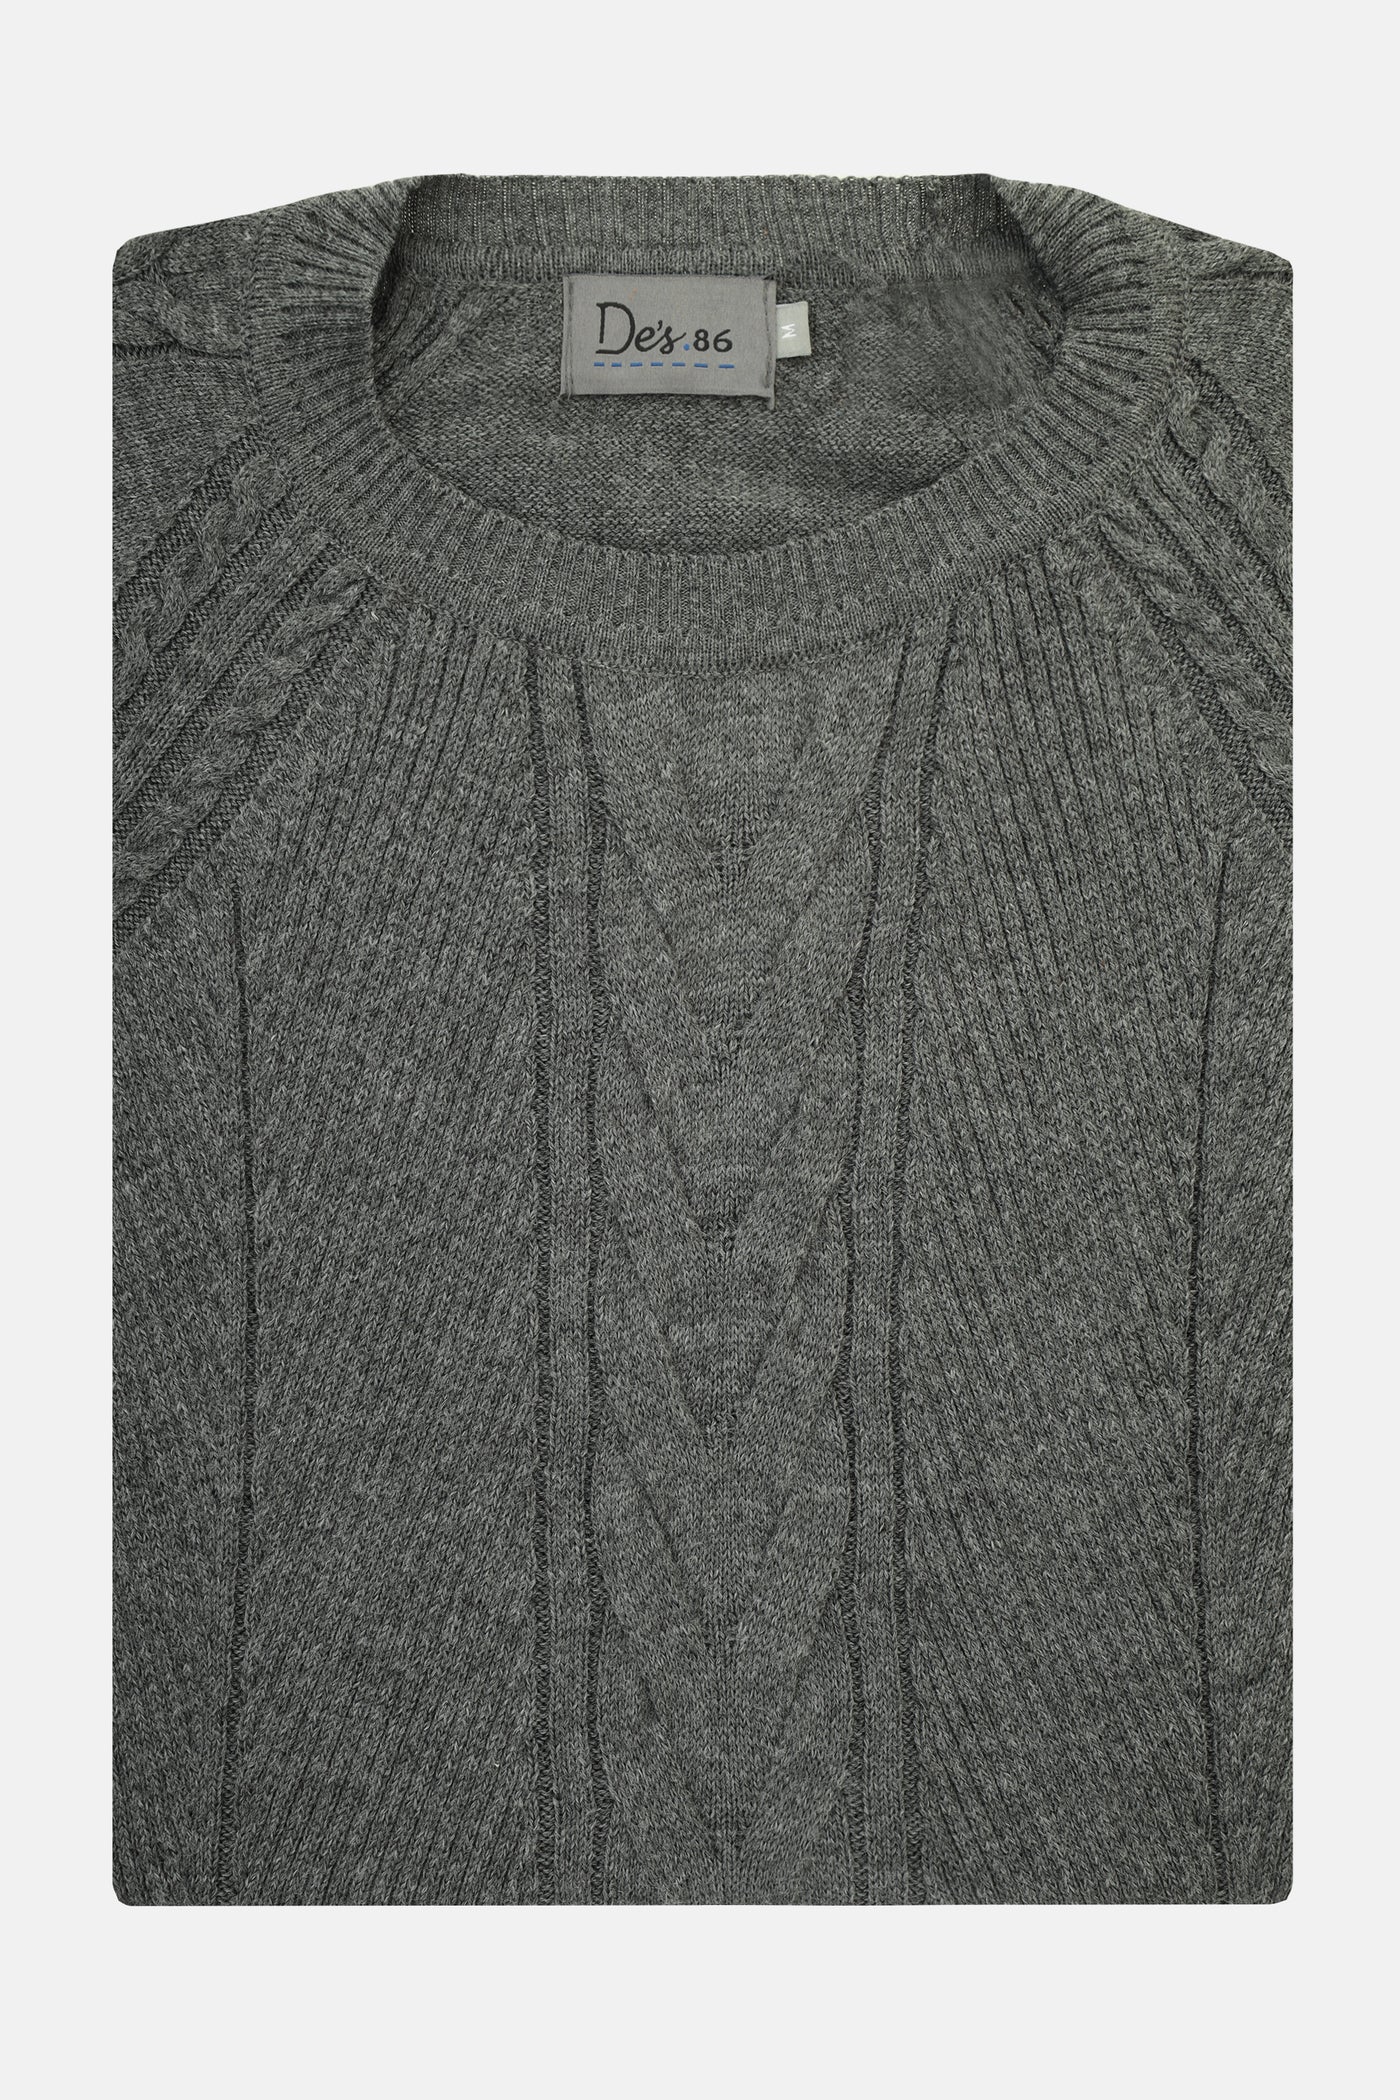 Jacquard Caple Knitted Gray Round Pullover